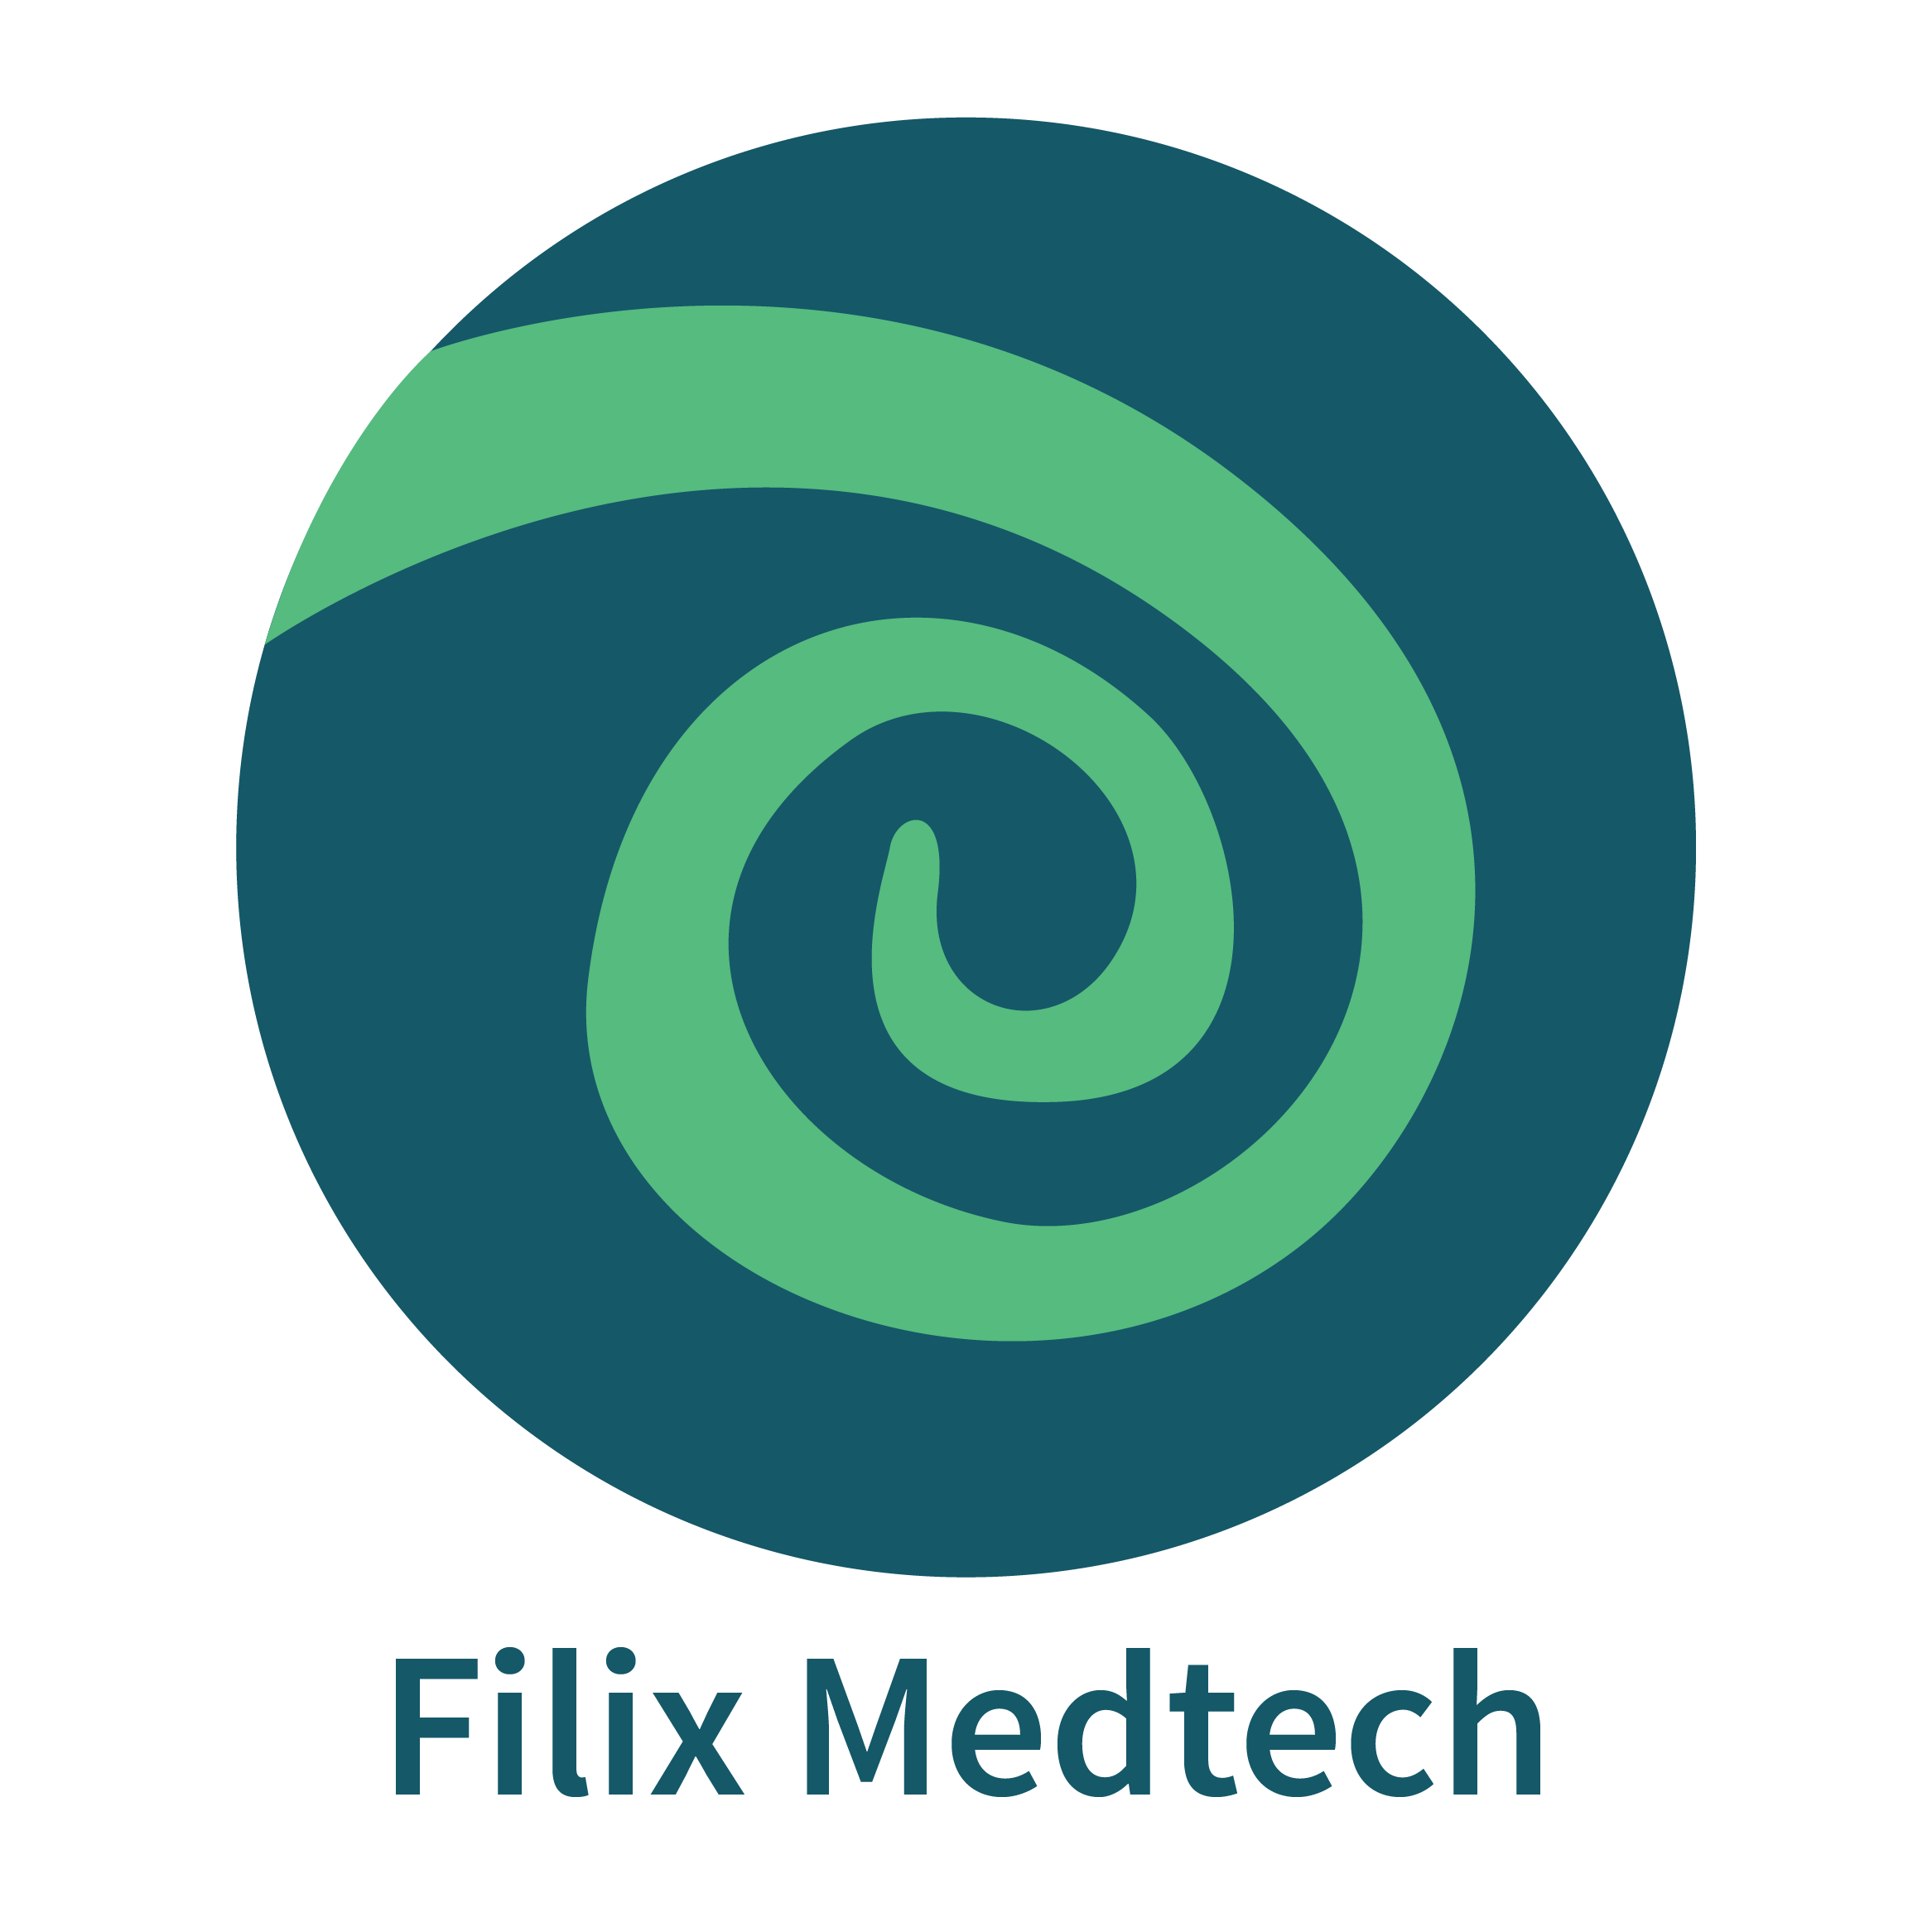 This shows the logo of Filix Medtech